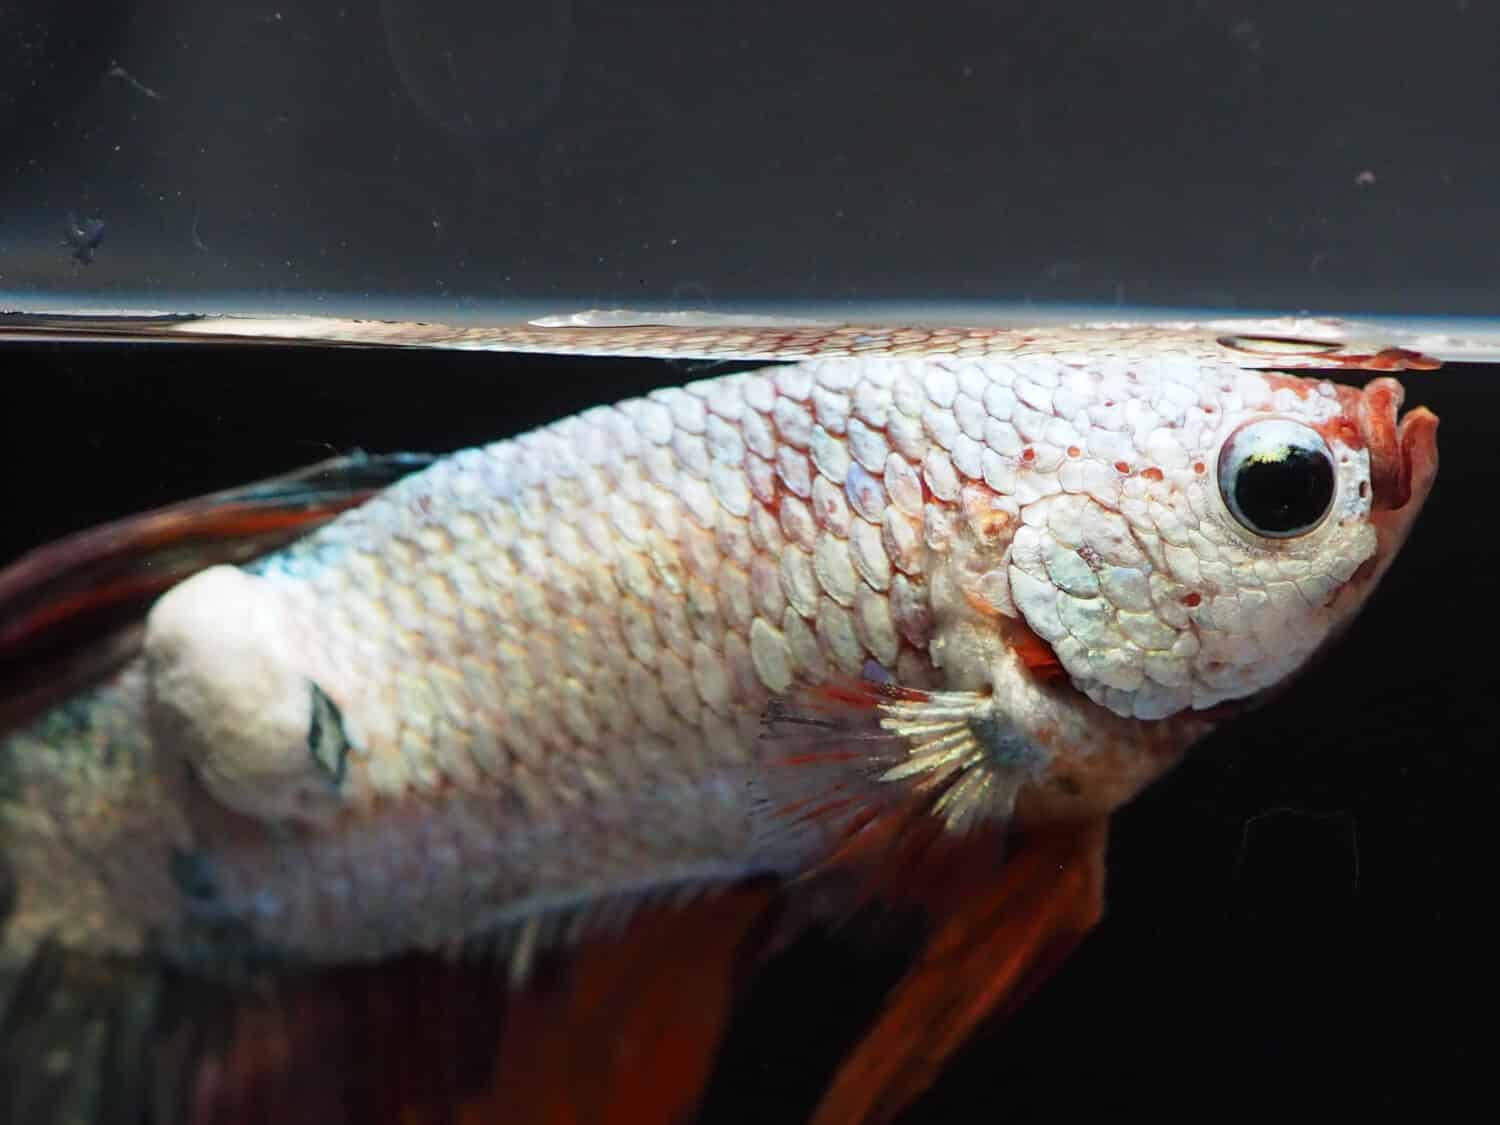 close up and selective focus on skin disease or  Infeksi Jamur Kulit Ikan Cupang or The fungus infection on the skin of Betta fish, the appearance of white patches just like a lump of cotton